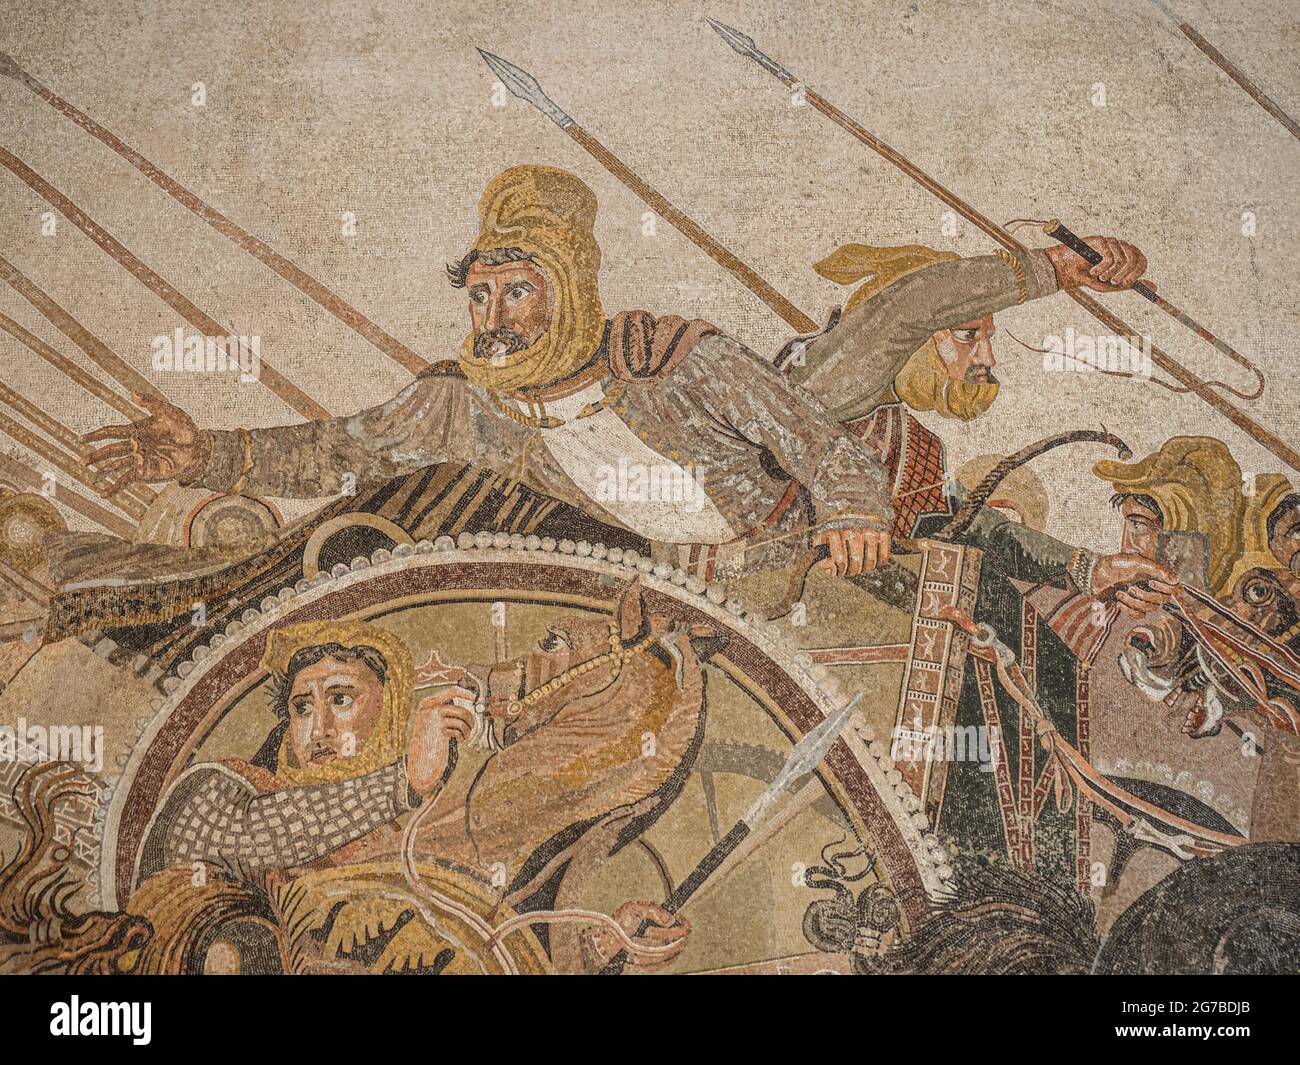 Battle of Alexander, Alexander Mosaic, Museu Archeologico Nazionale, National Archaeological Museum, Naples, Italy Stock Photo